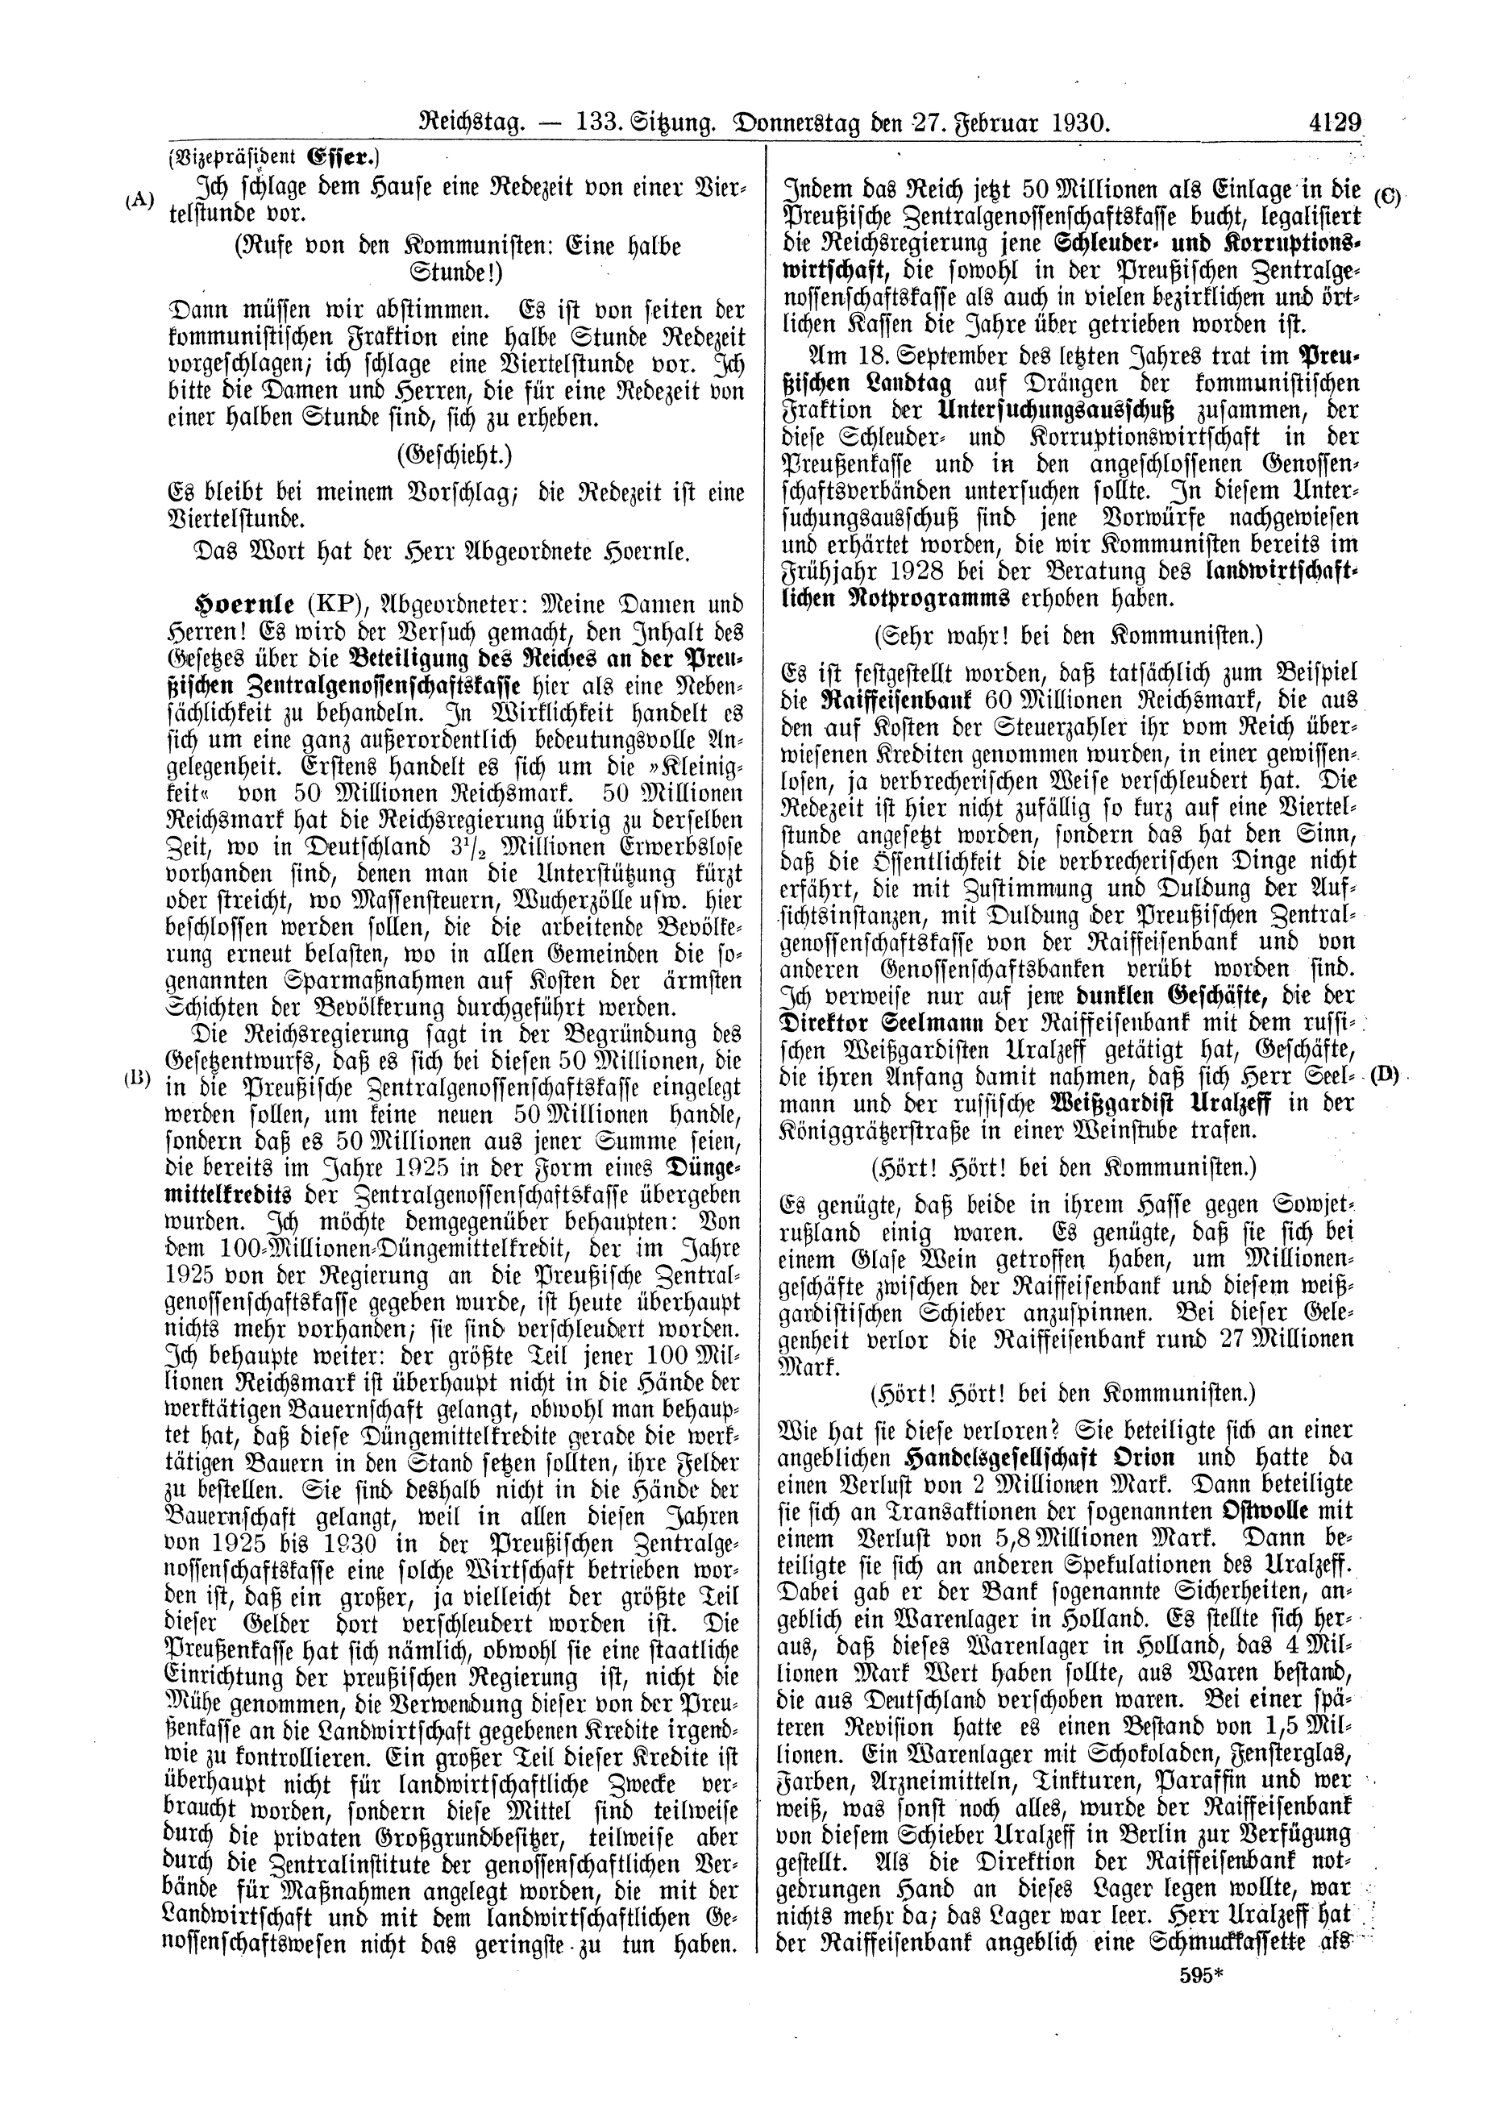 Scan of page 4129